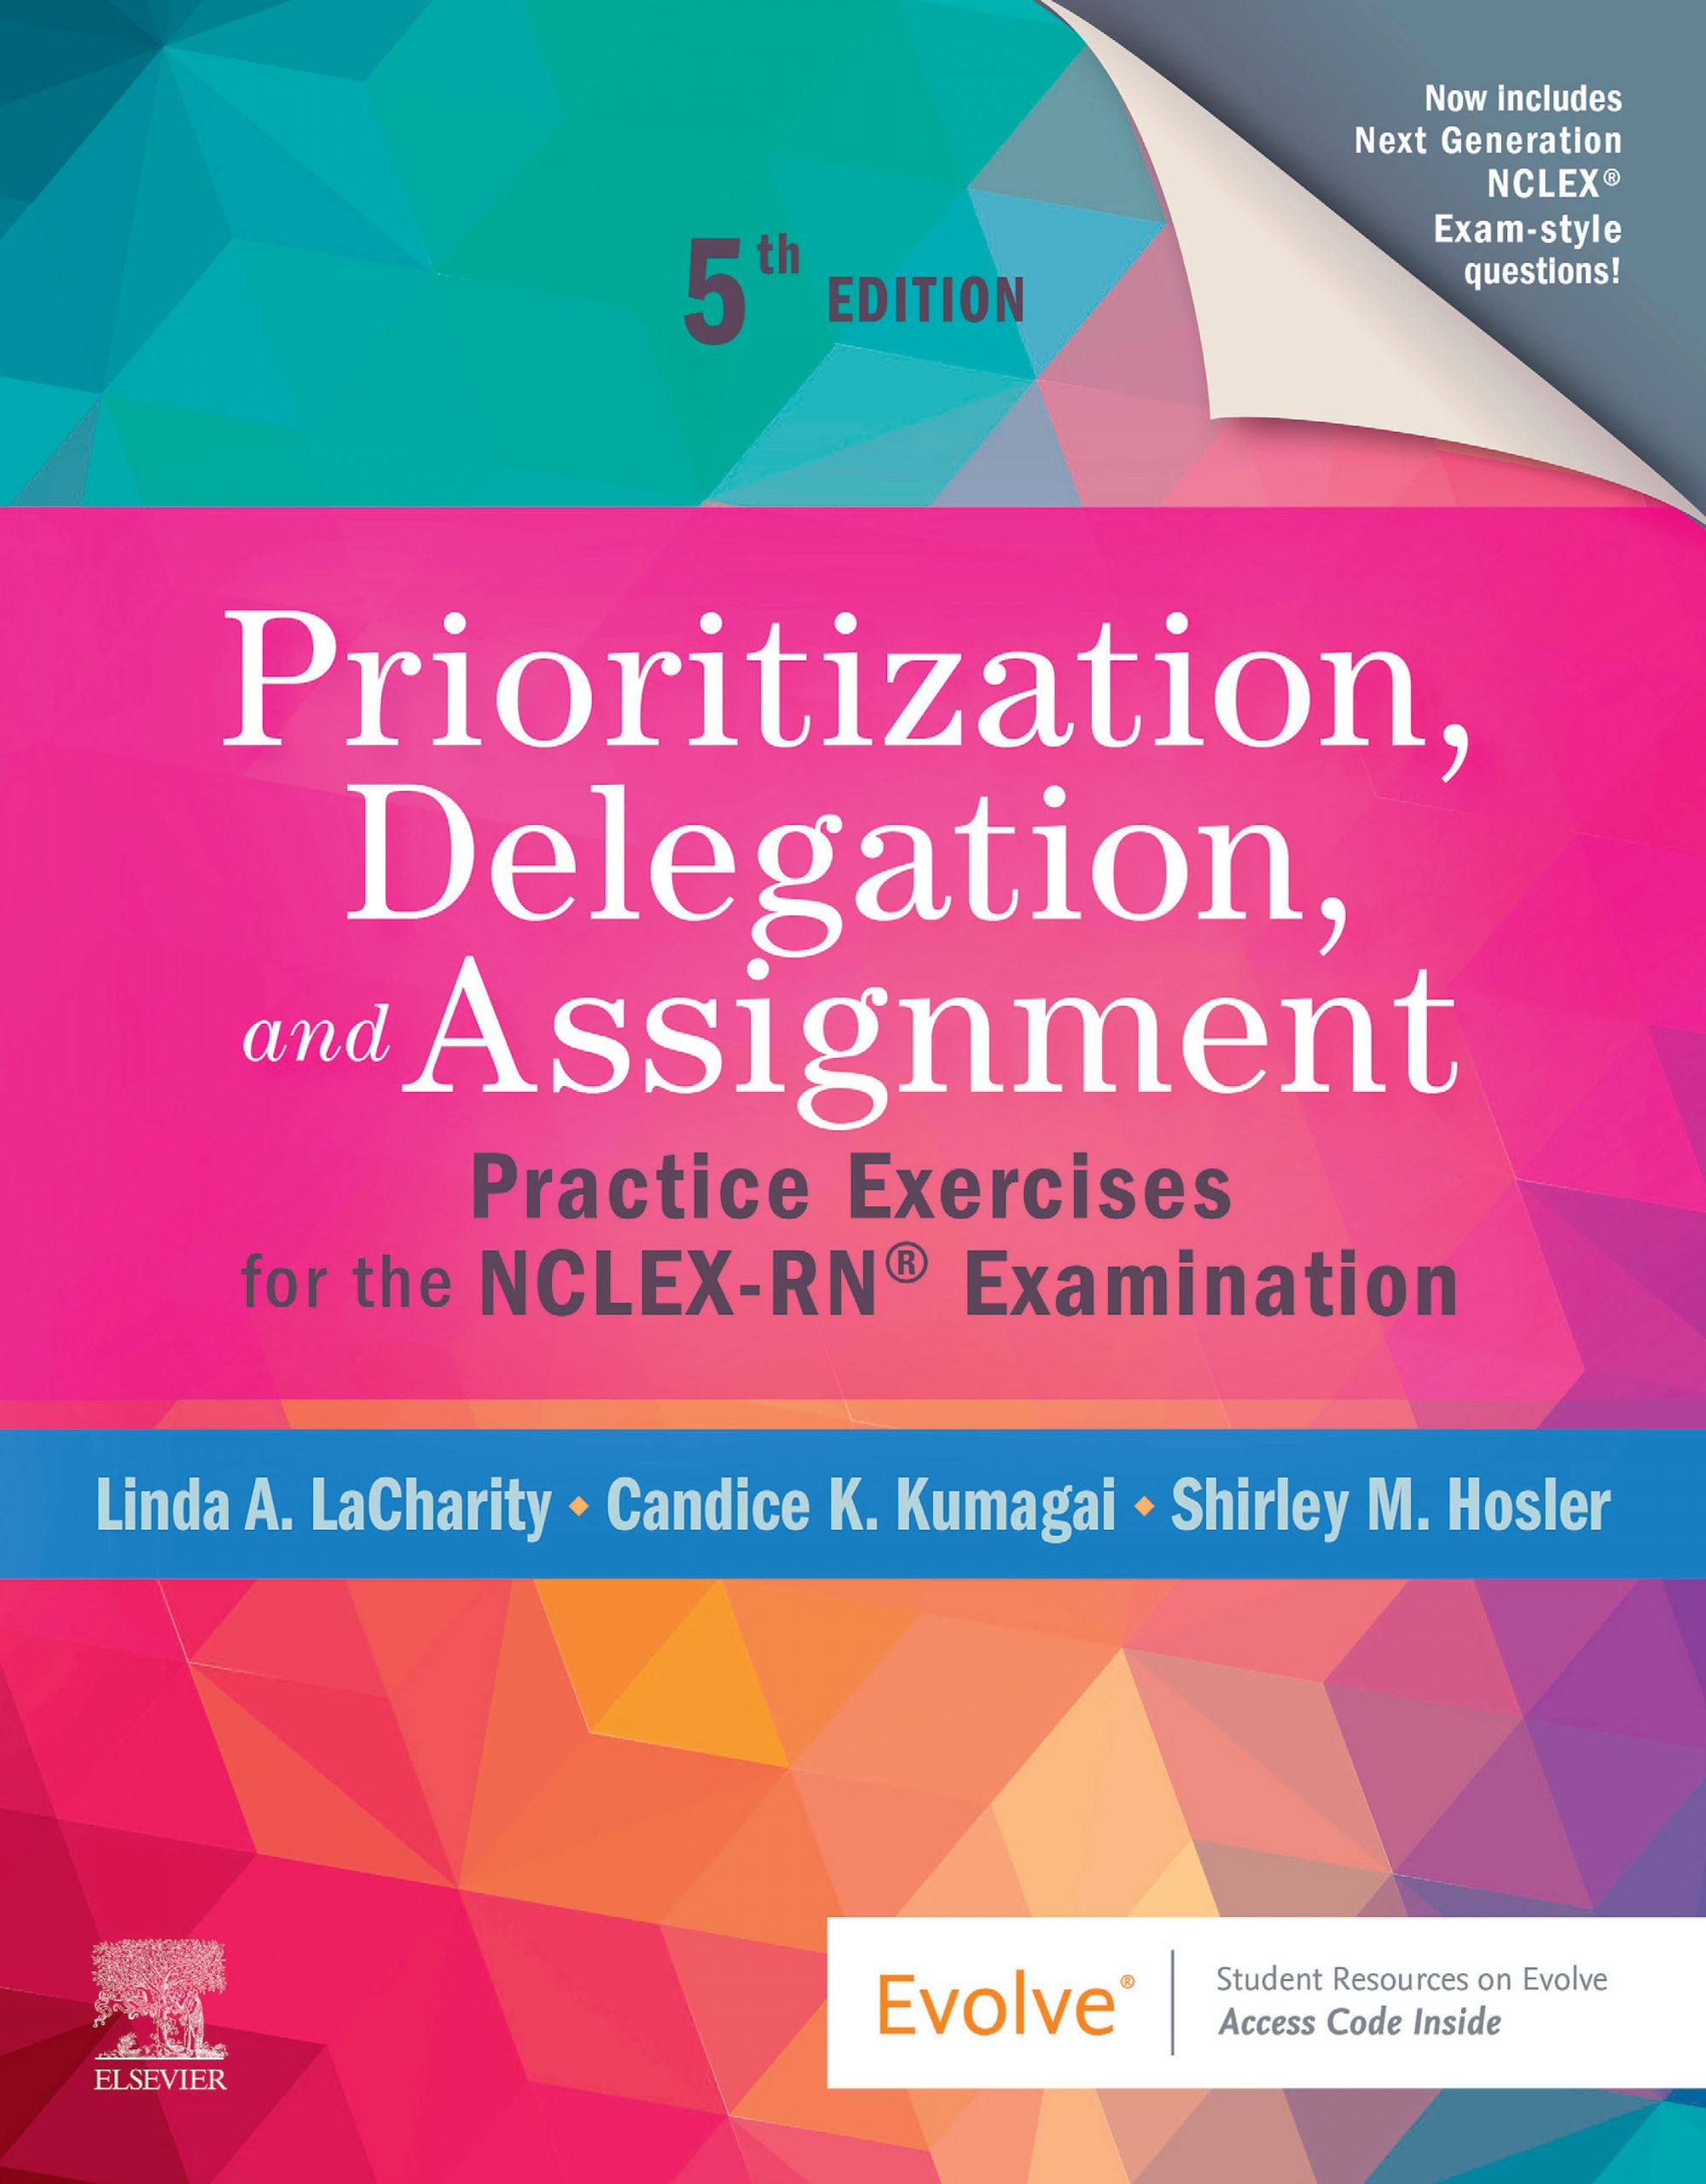 Prioritization, Delegation, and Assignment: Practice Exercises for the NCLEX Examination , Fifth Edition (2022) 603pp. 978-0-323-68316-6